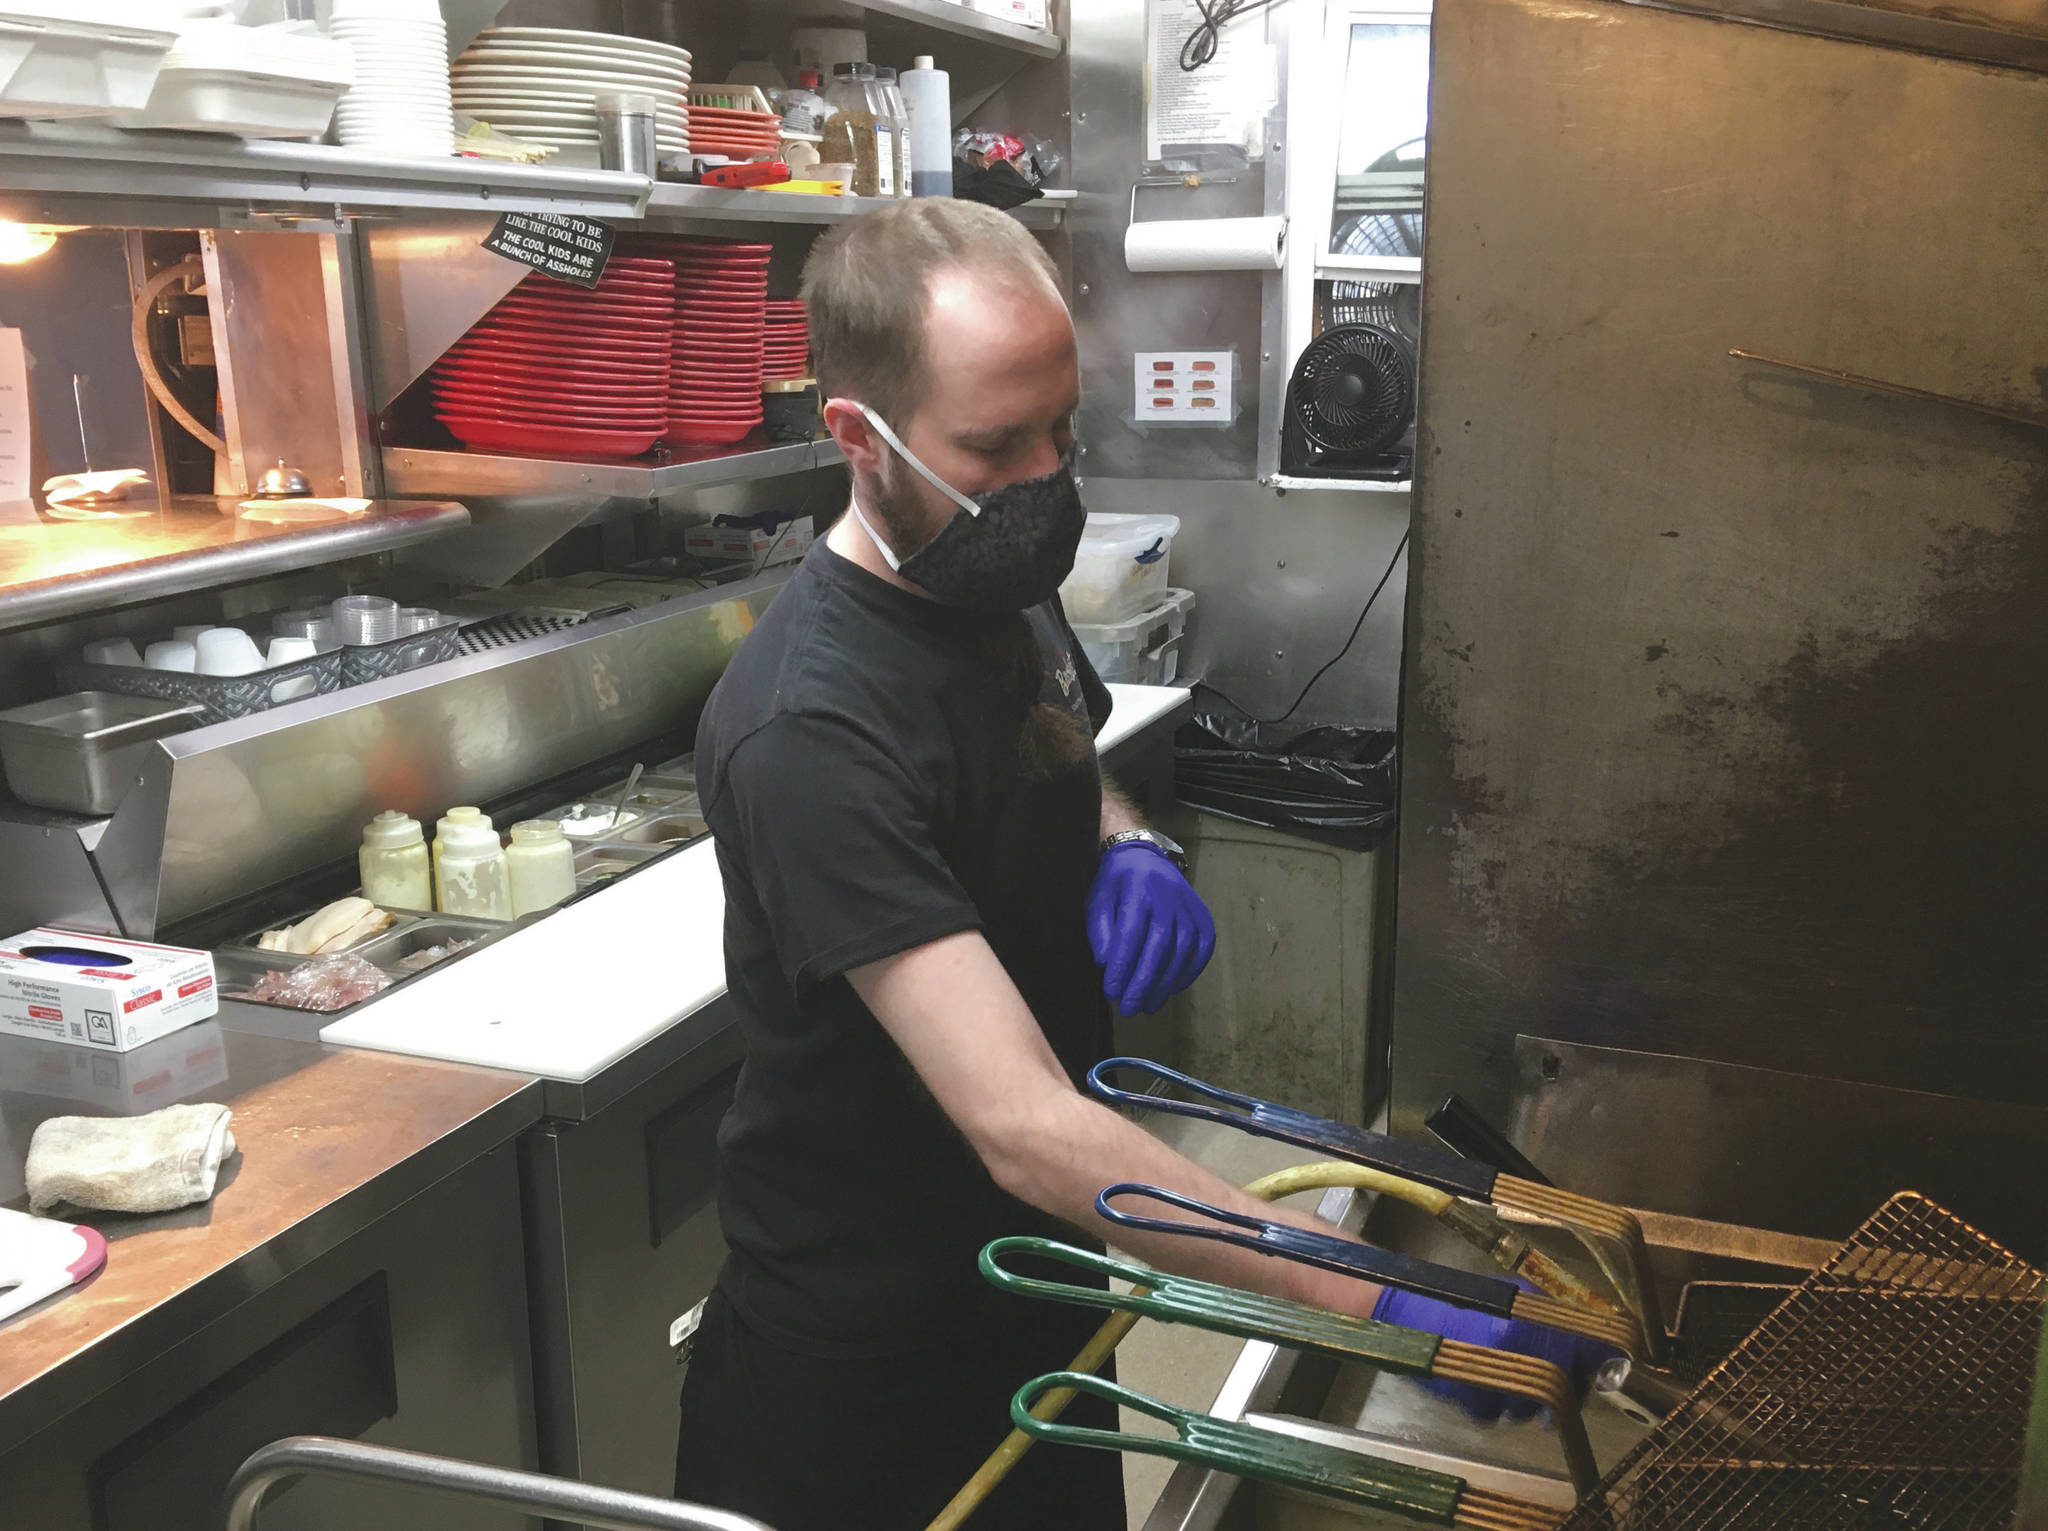 Trevor Pound, a line cook at Buckets Sports Grill in Soldotna, filters the friers Thursday, April 30, 2020. Despite the heat in the kitchen, state regulations say all restaurant employees must wear cloth face masks. “It’s completely miserable, dude,” Pound said. “It gets so hot back here I can’t breathe without a face mask. But I’ve got to pay the bills, so I wear a mask.” (Photo by Jeff Helminiak/Peninsula Clarion)